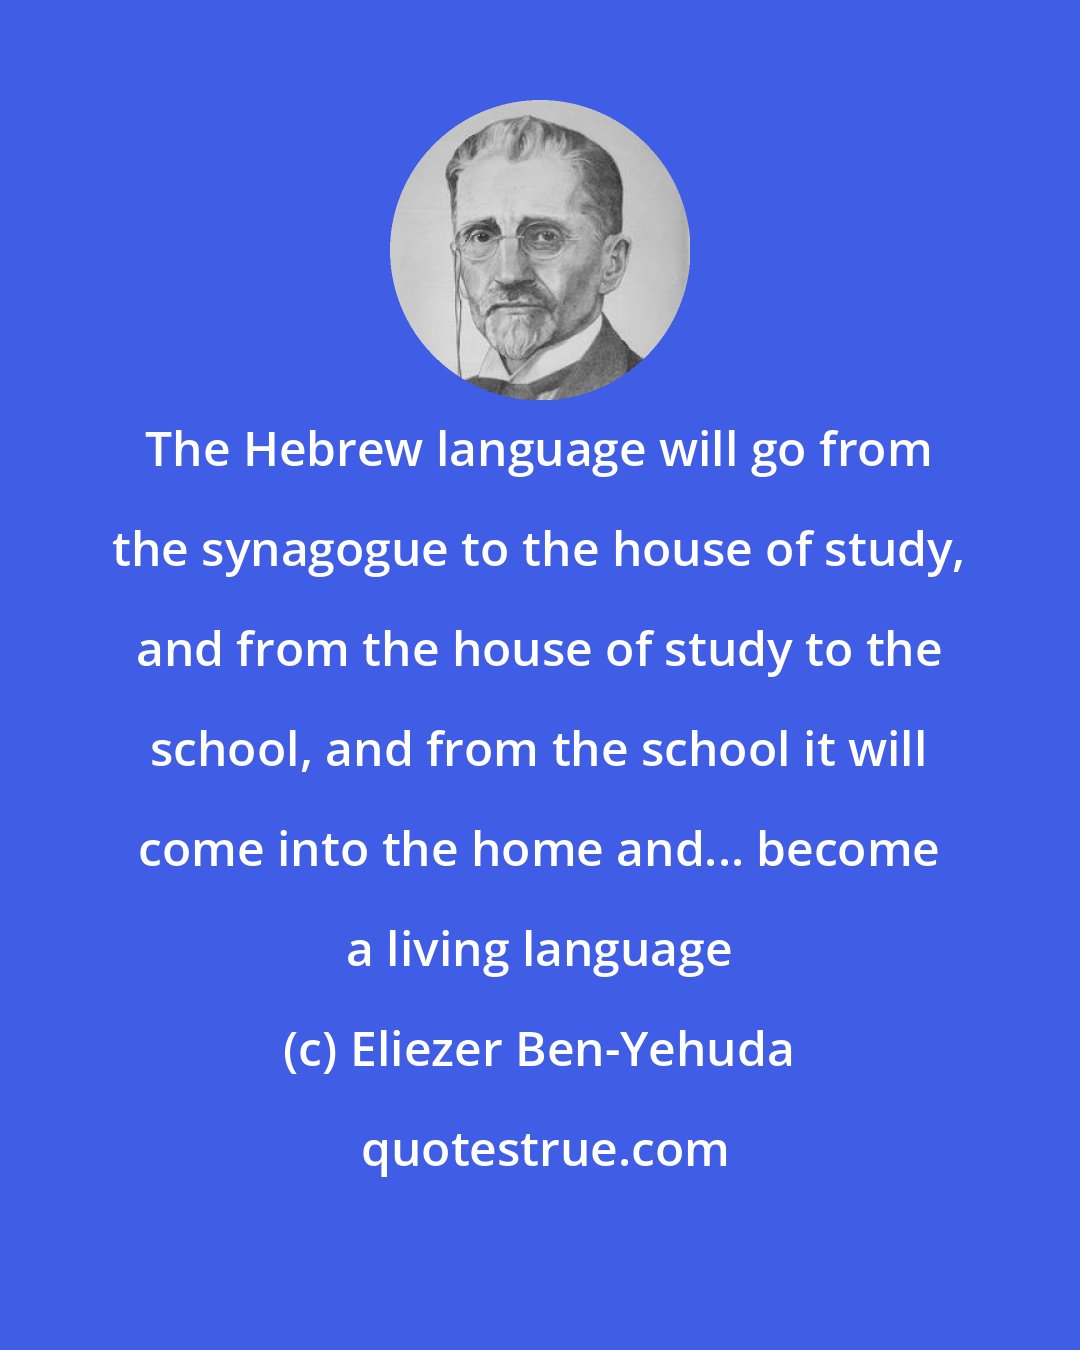 Eliezer Ben-Yehuda: The Hebrew language will go from the synagogue to the house of study, and from the house of study to the school, and from the school it will come into the home and... become a living language